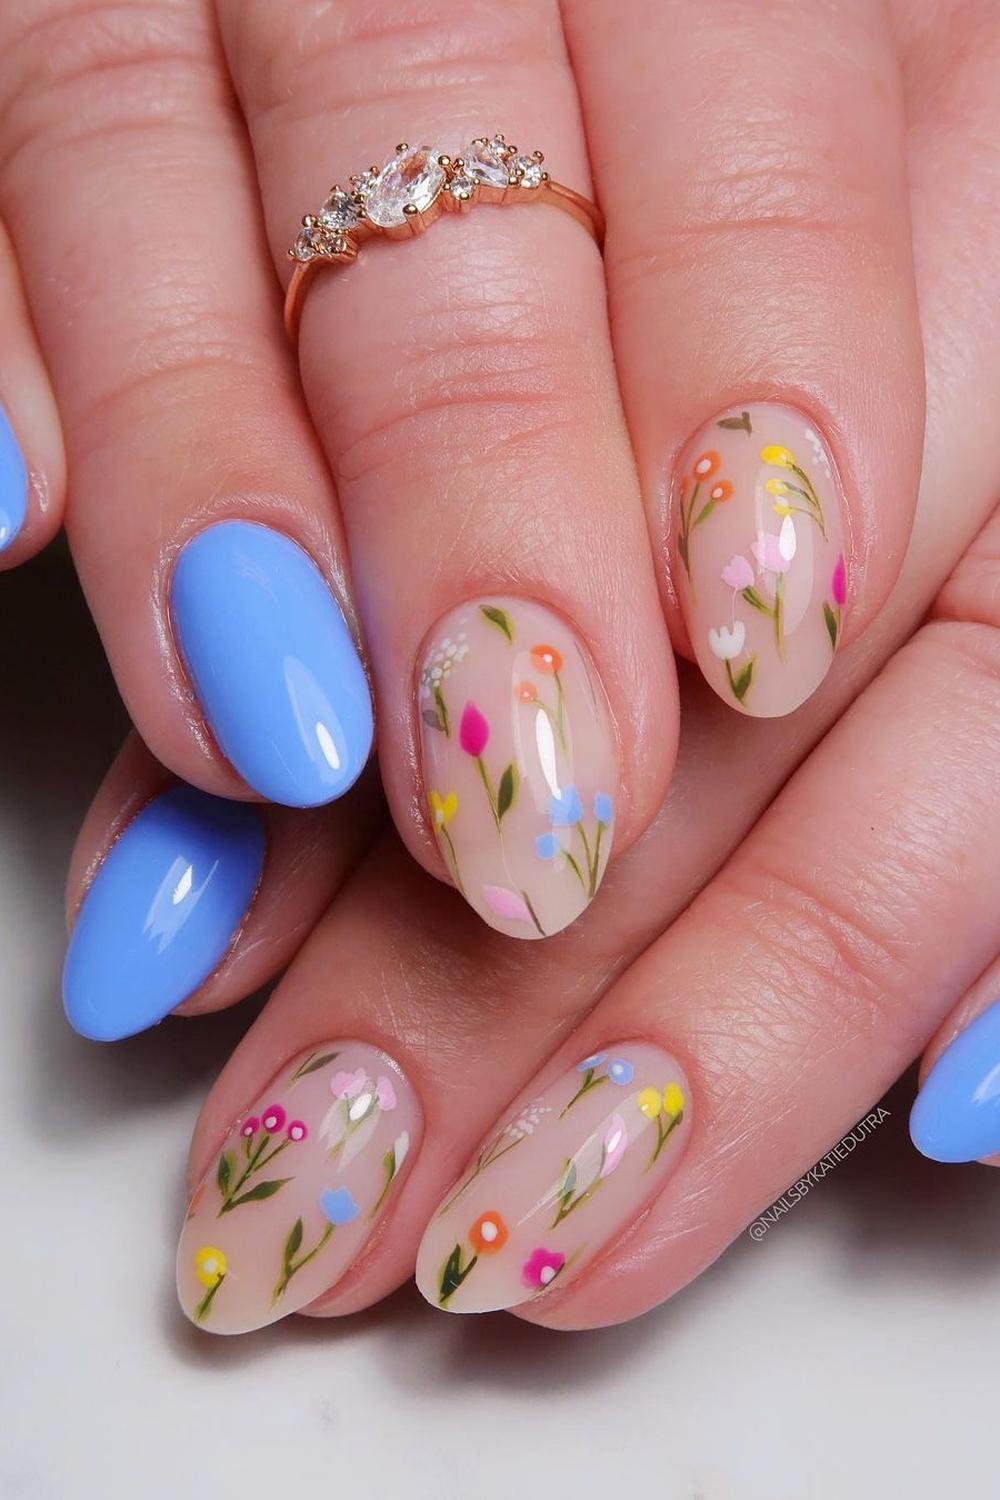 23 - Picture of Whimsical Nails